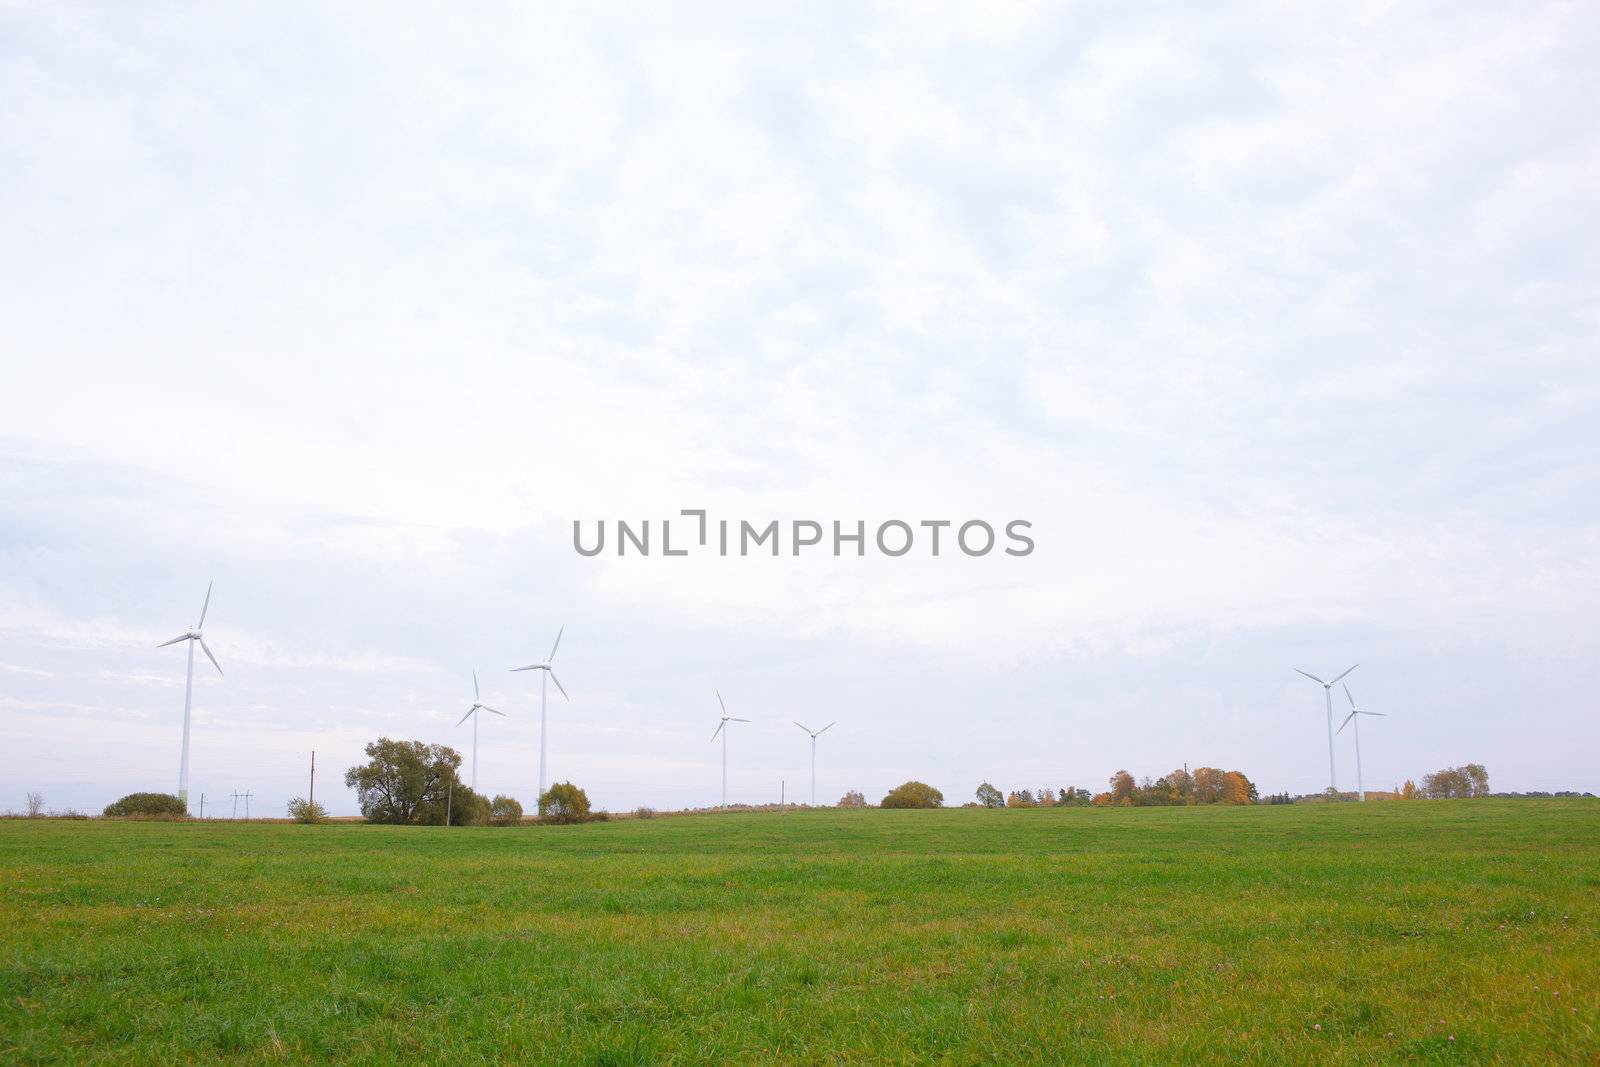 Wide shot of the wind turbines in the field.